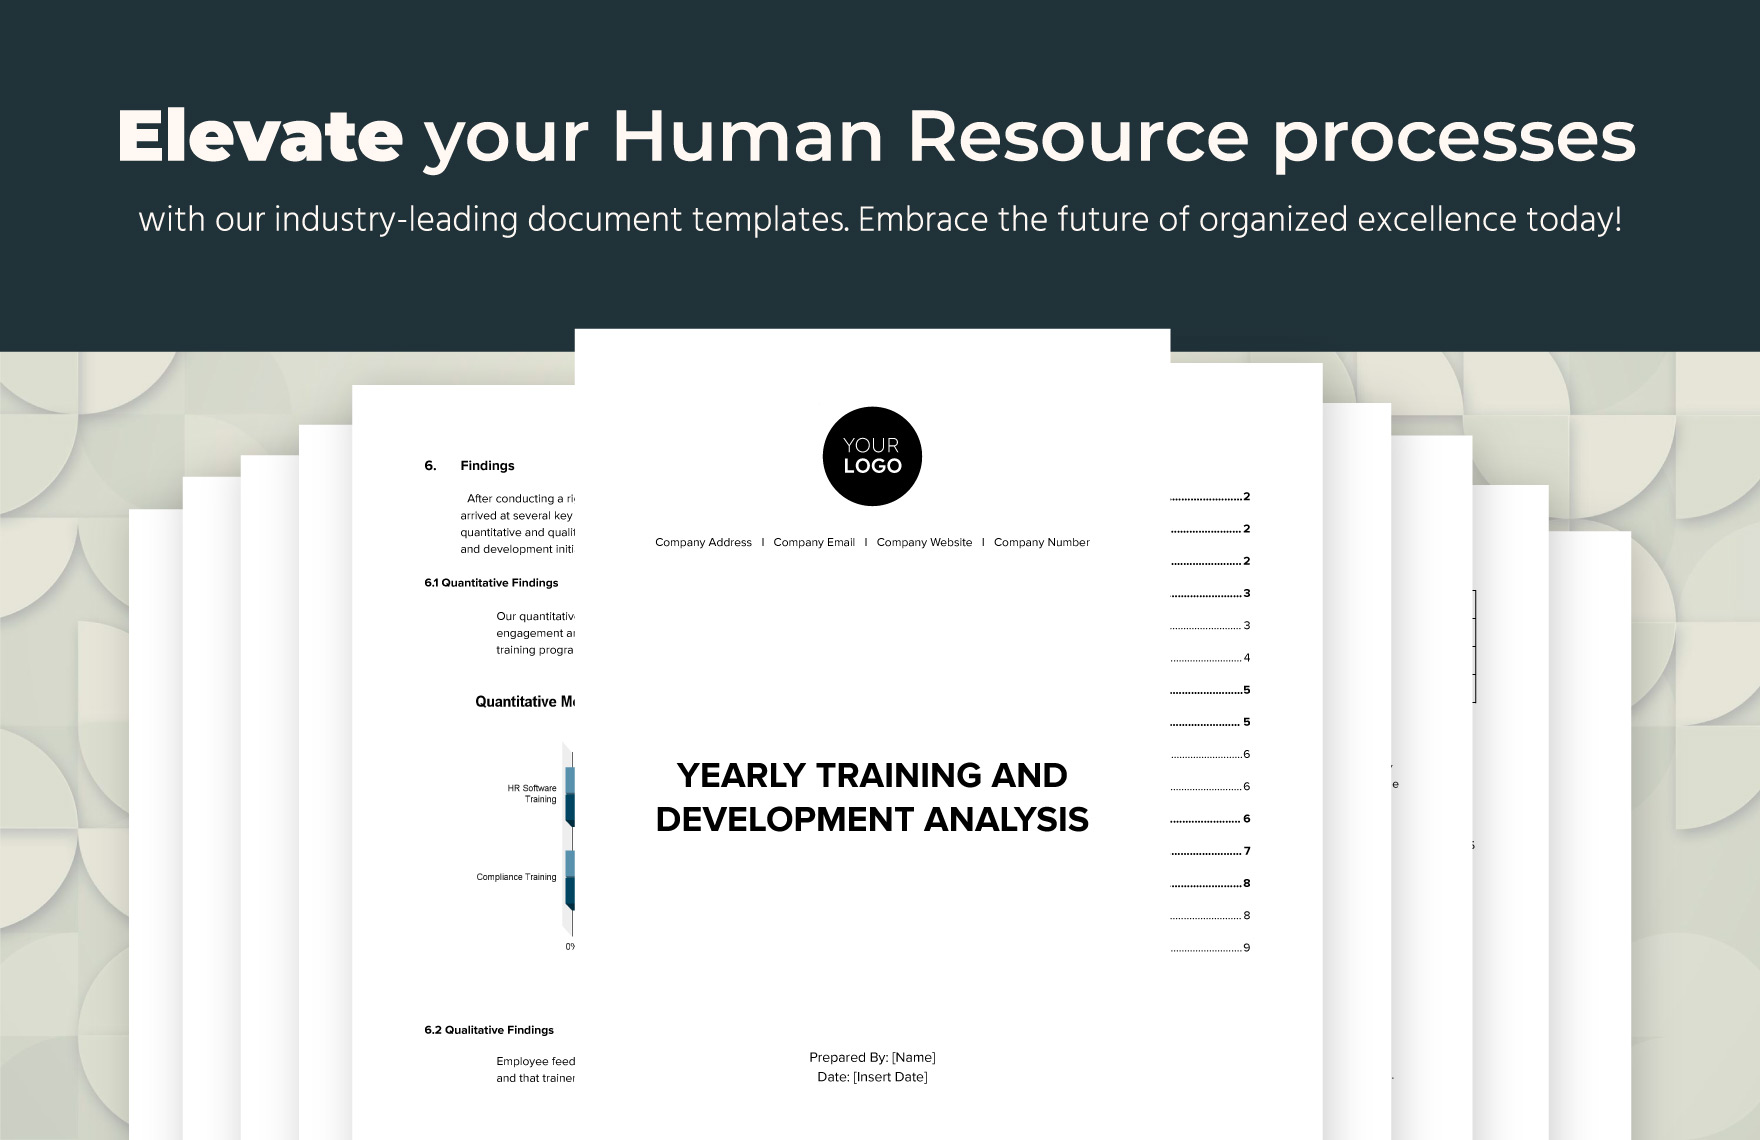 Yearly Training and Development Analysis HR Template